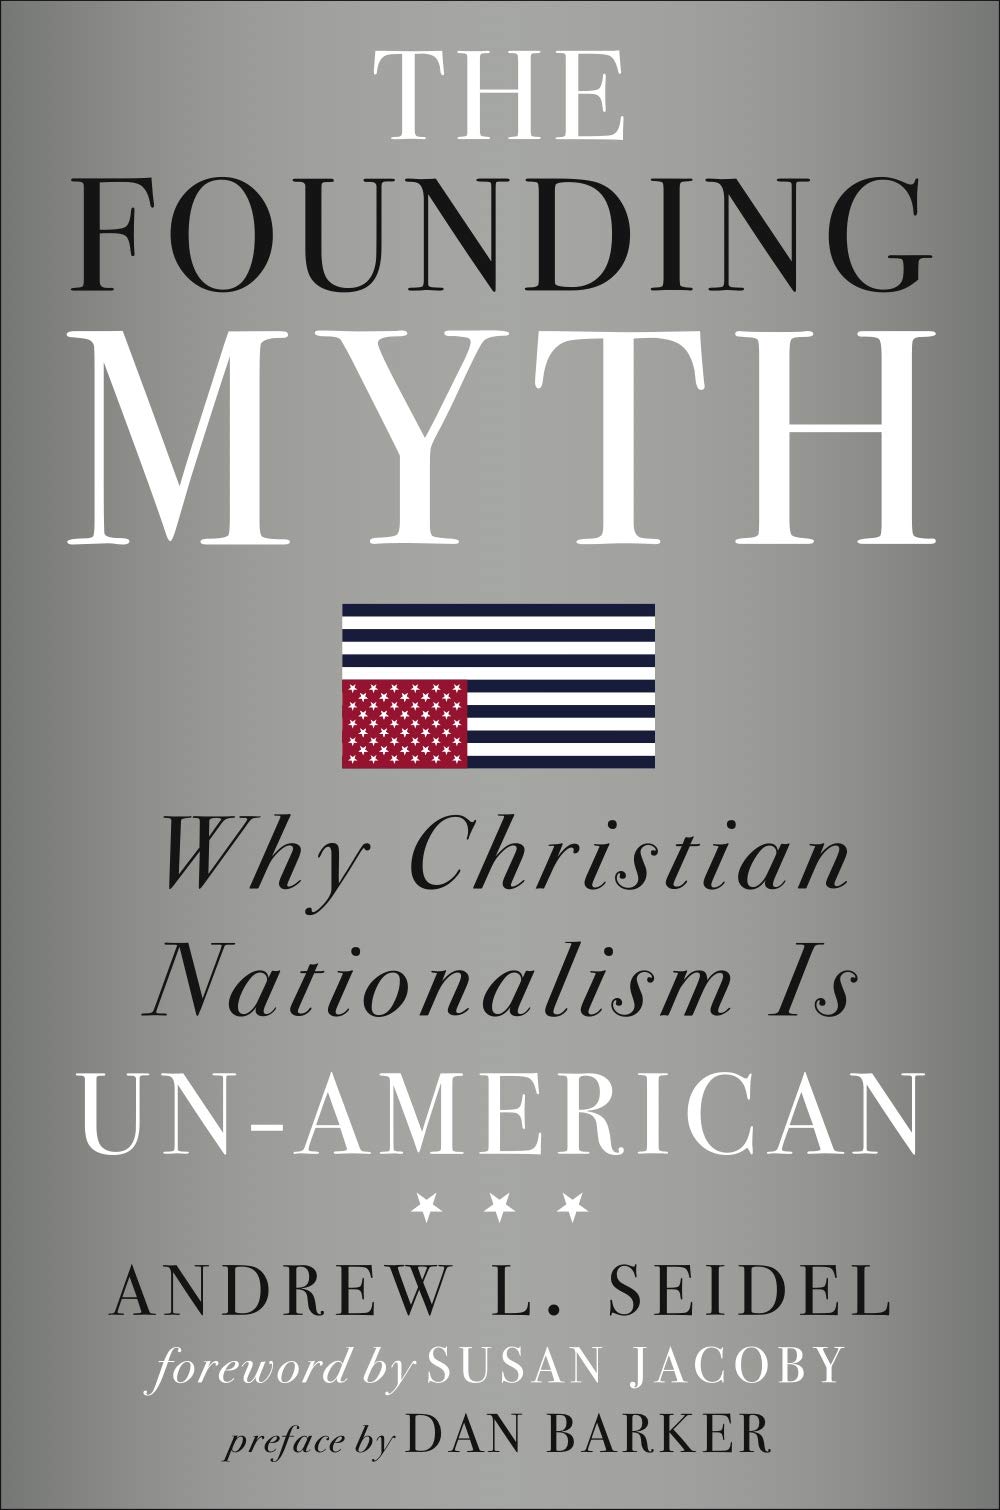 The Founding Myth: Why Christian Nationalism is Un-American